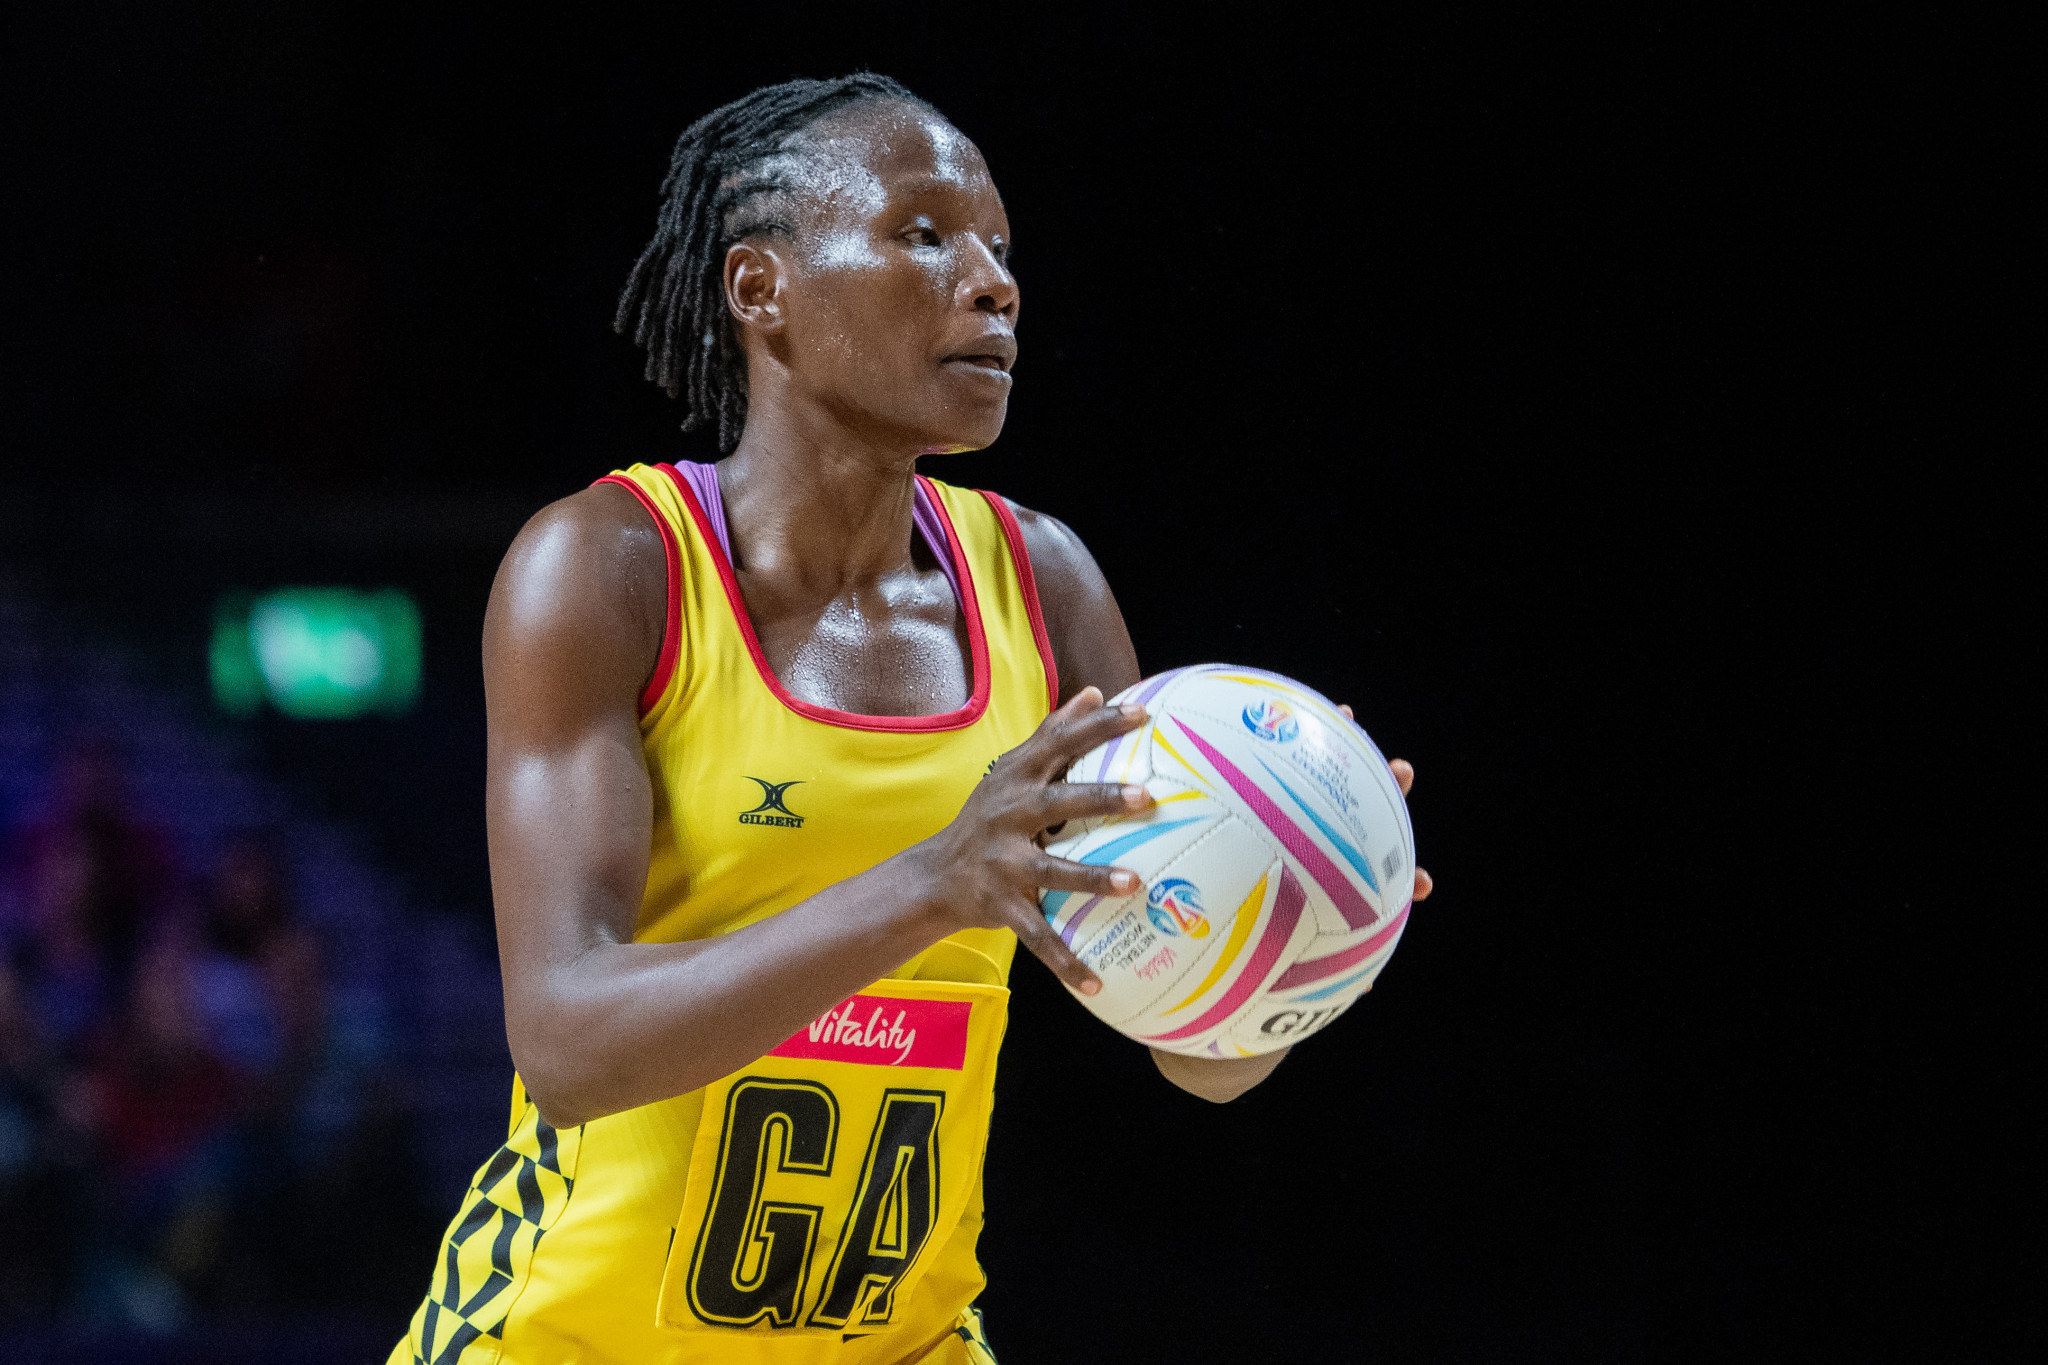 Uganda's netball team are ranked sixth in the world and have hopes of sneaking into the medals at Birmingham 2022 ©Getty Images